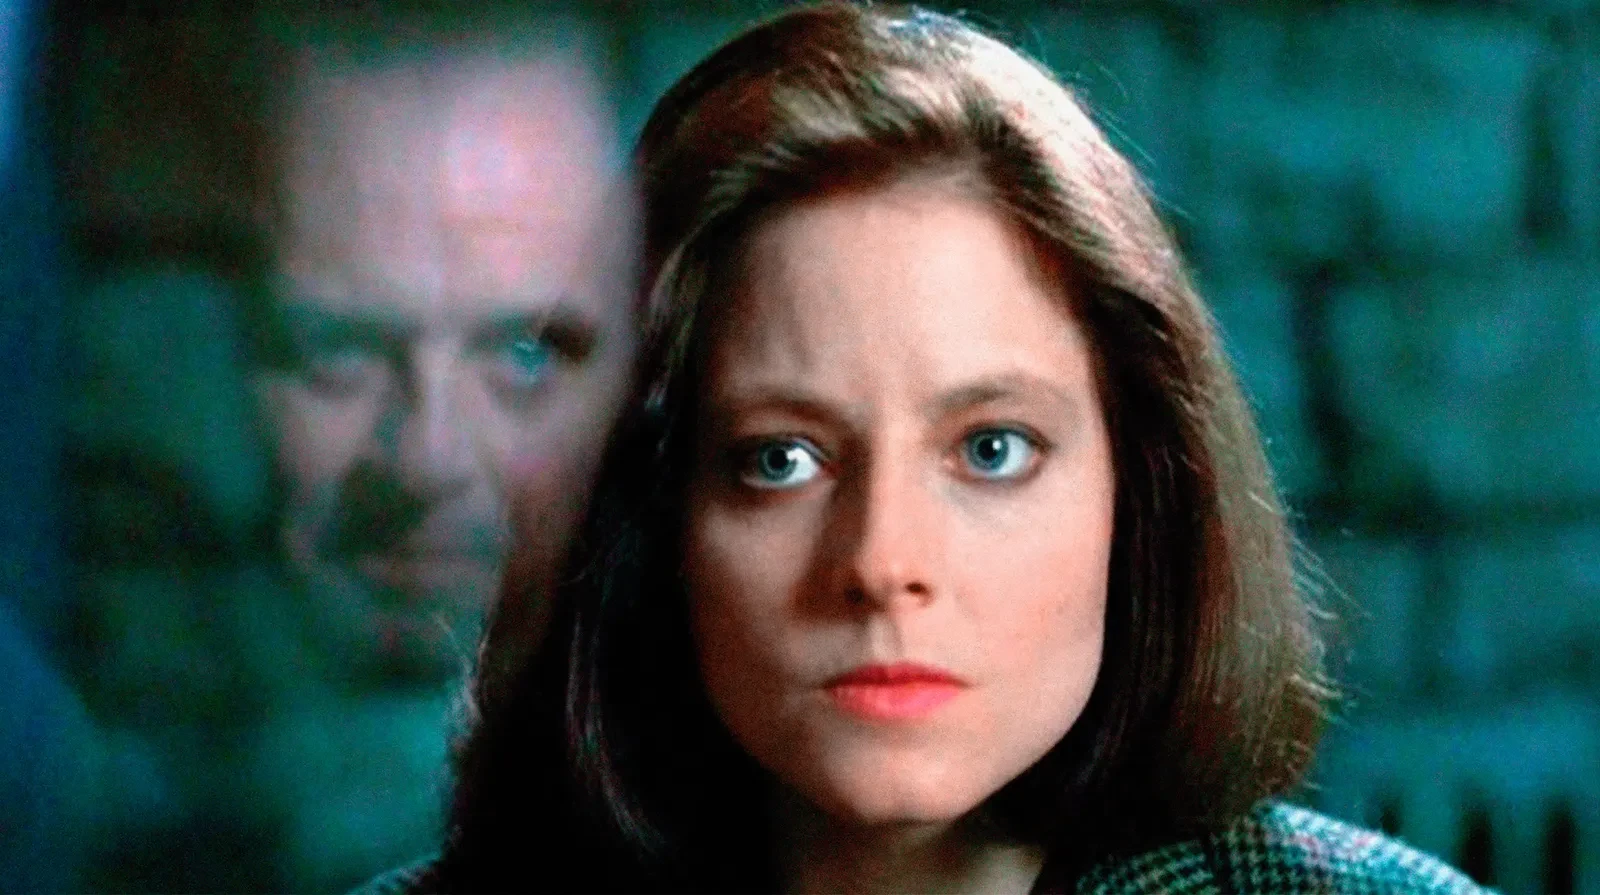 Jodie Foster in a still from Silence of the Lambs